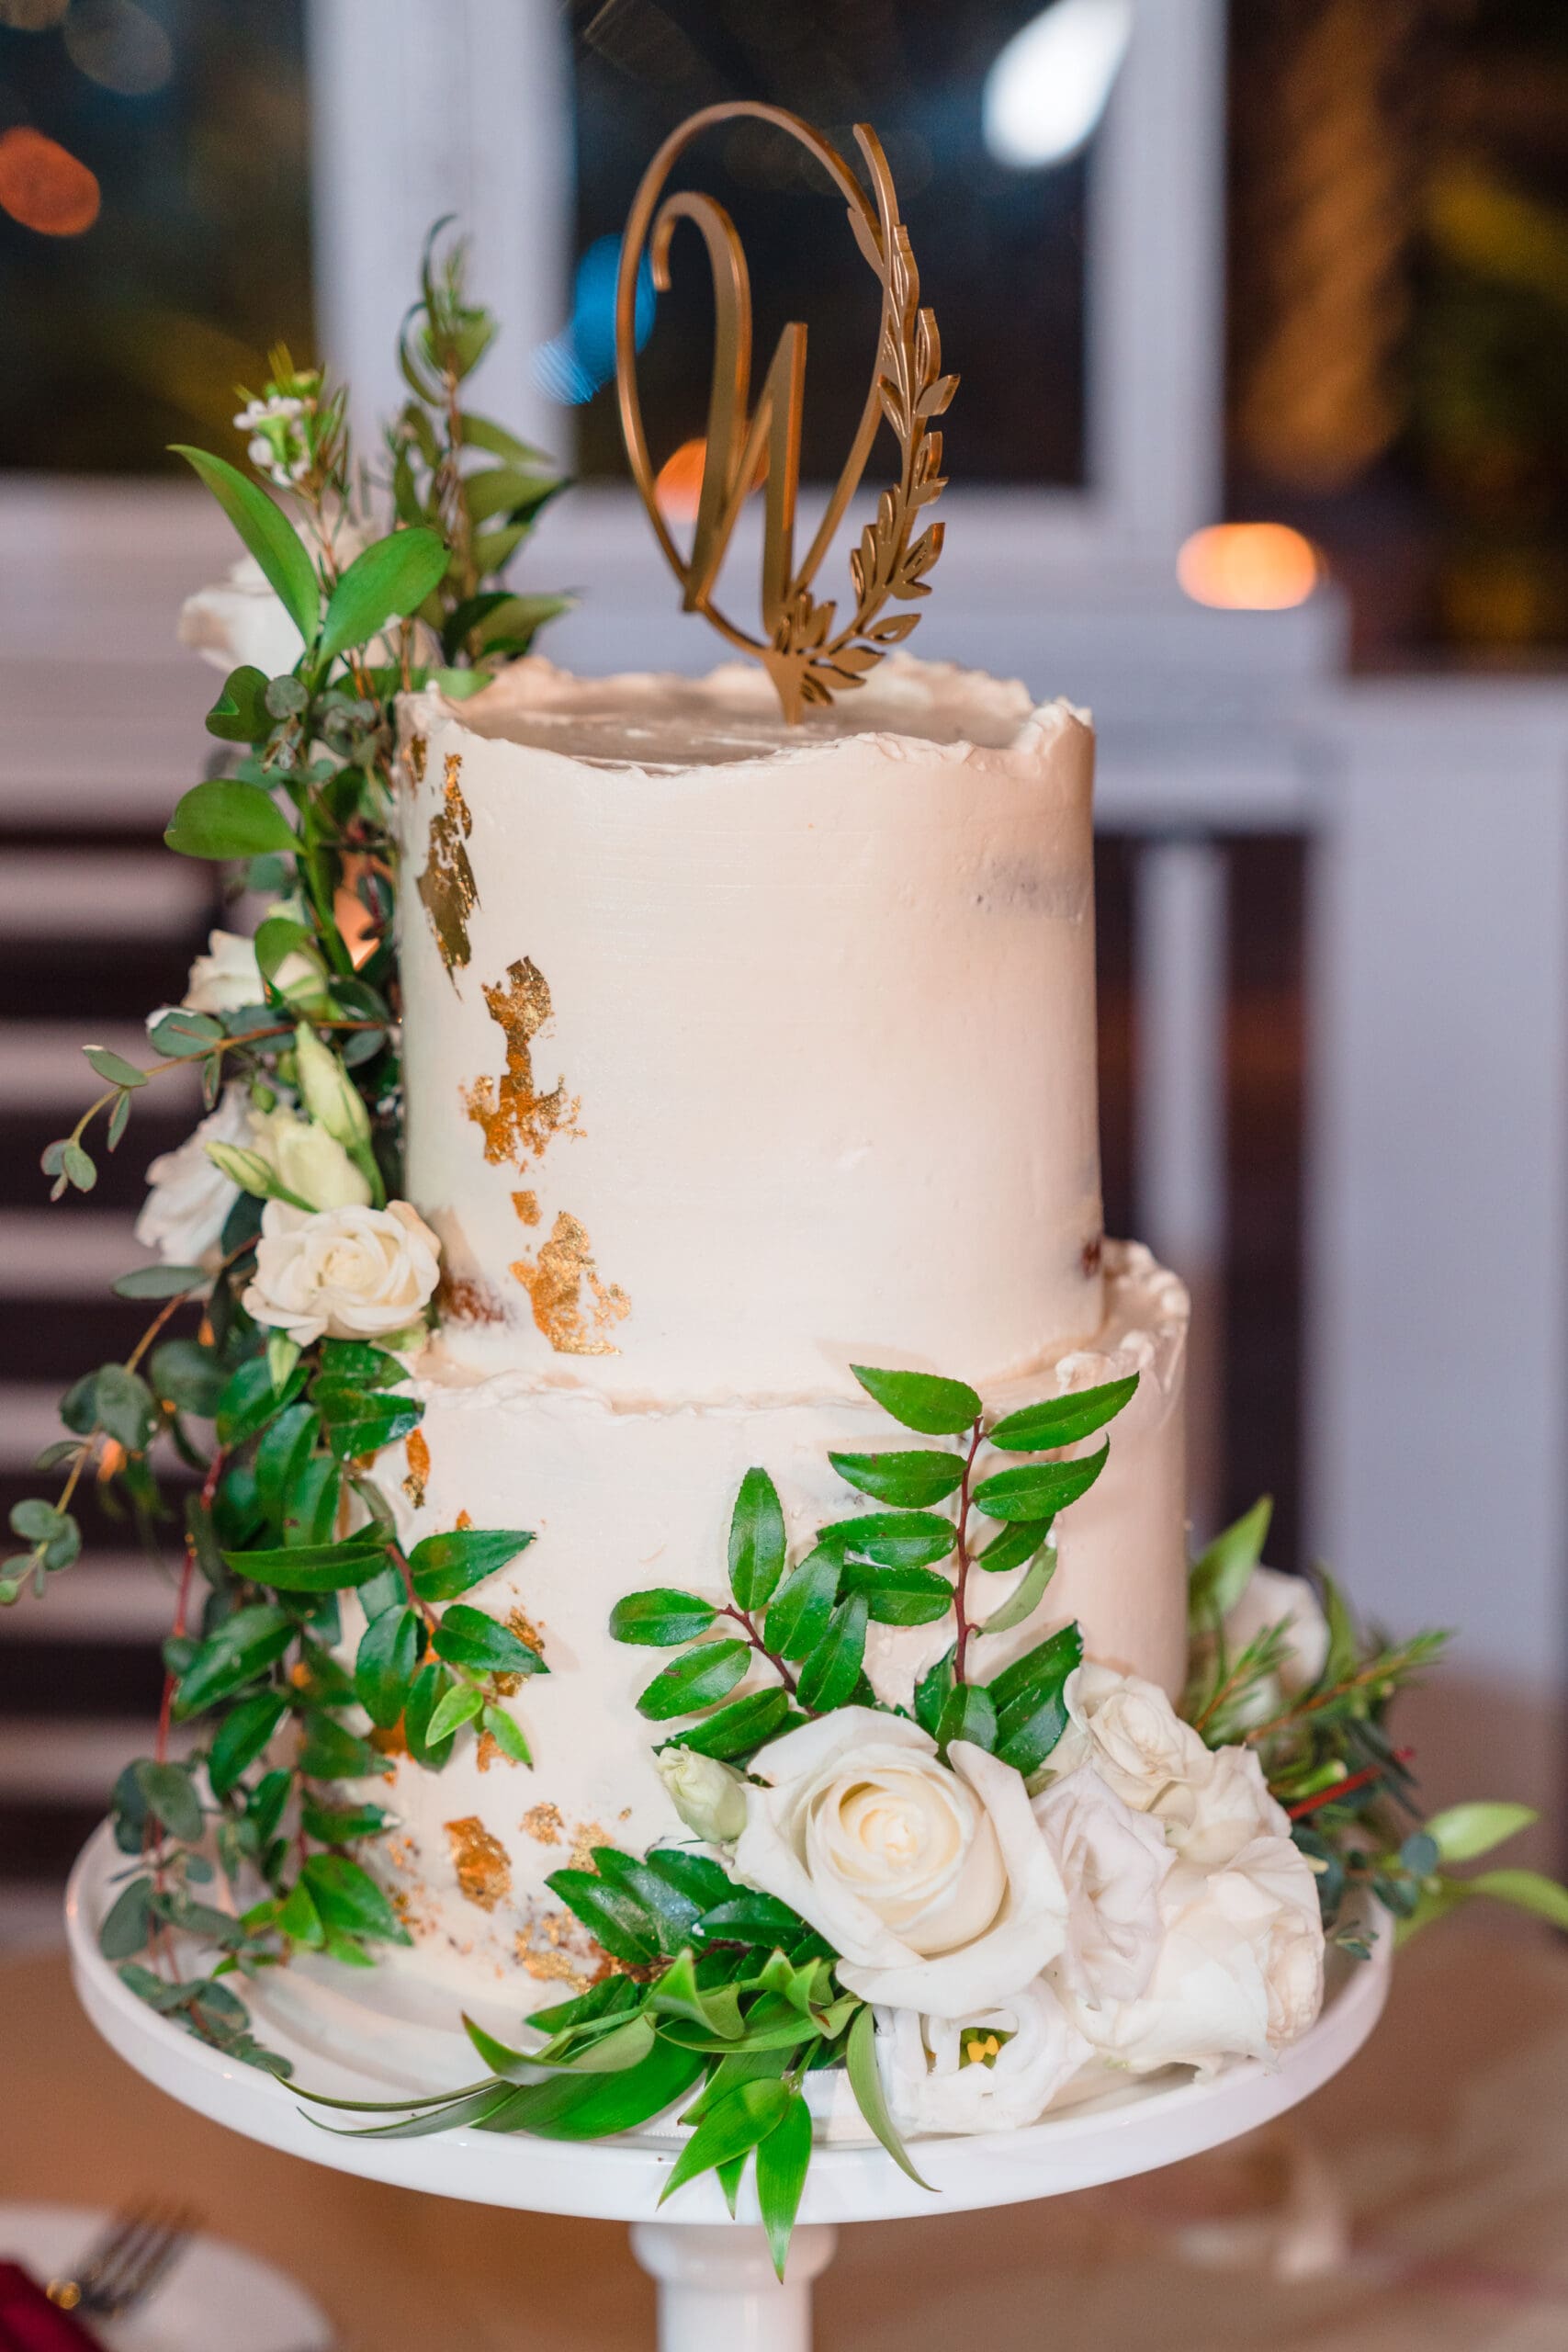 Close-up of a two-tier cake adorned with edible white flowers.